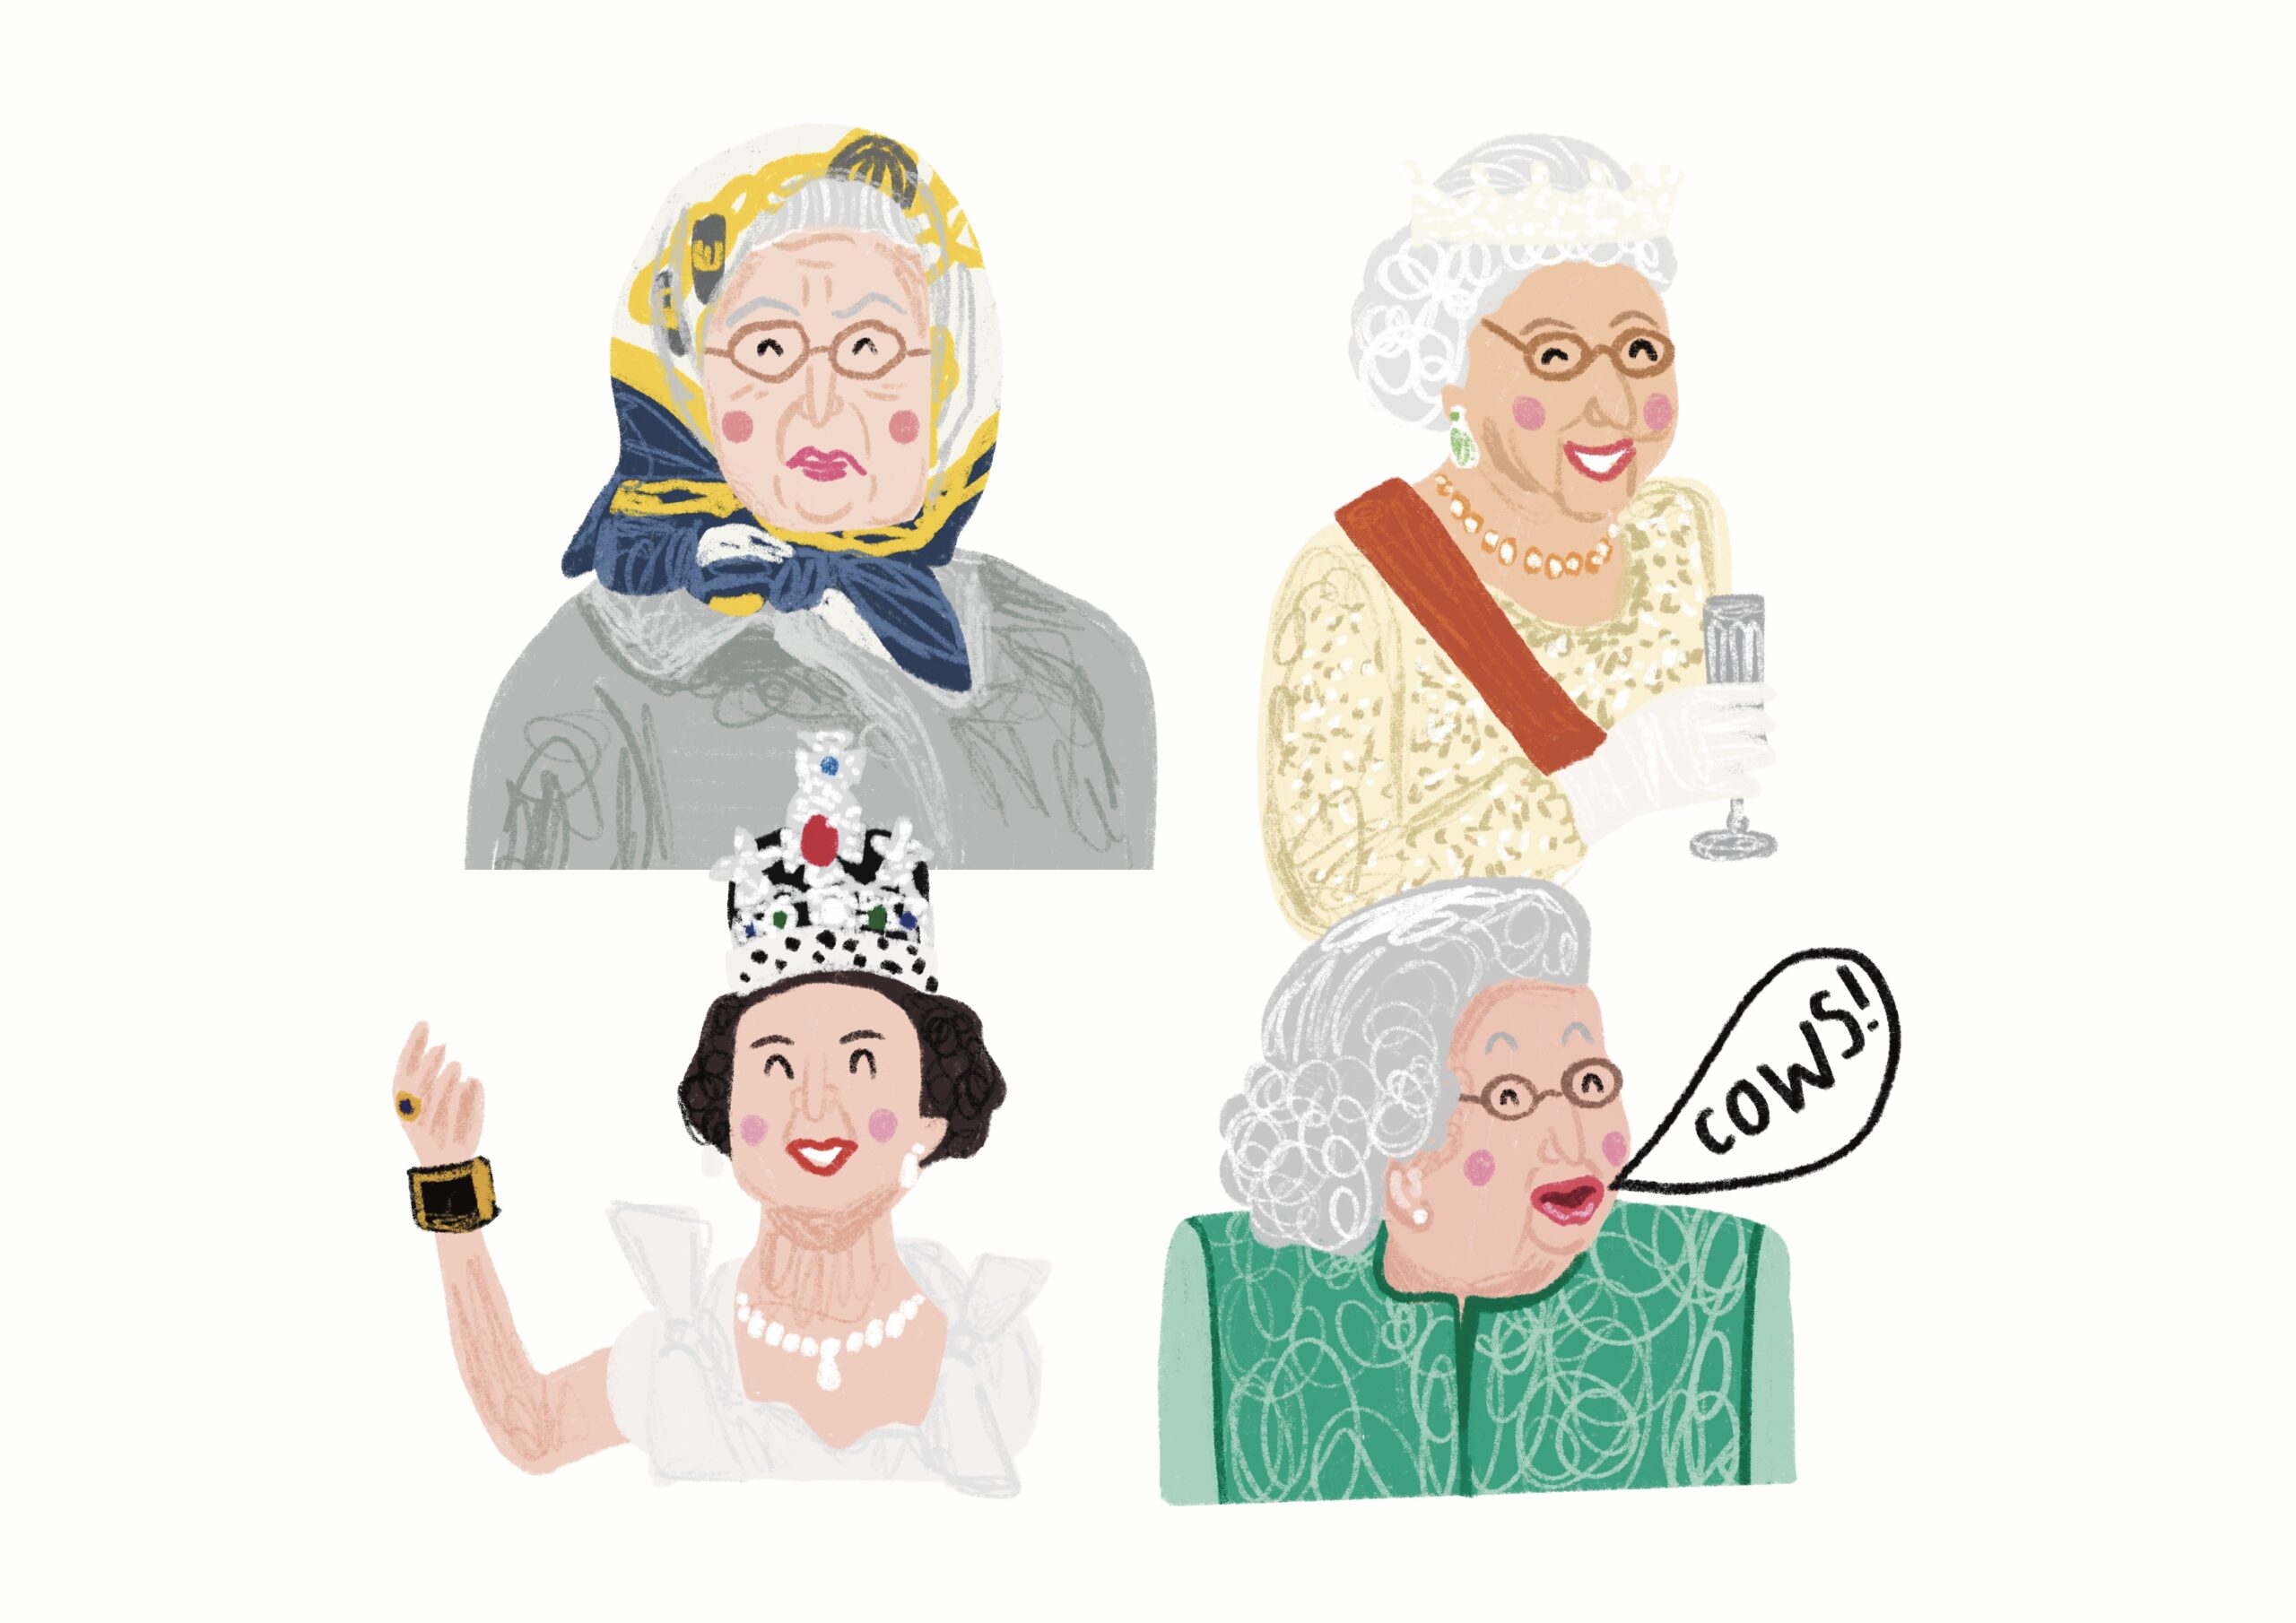 Four separate illustrations of the late Queen Elizabeth the Second.